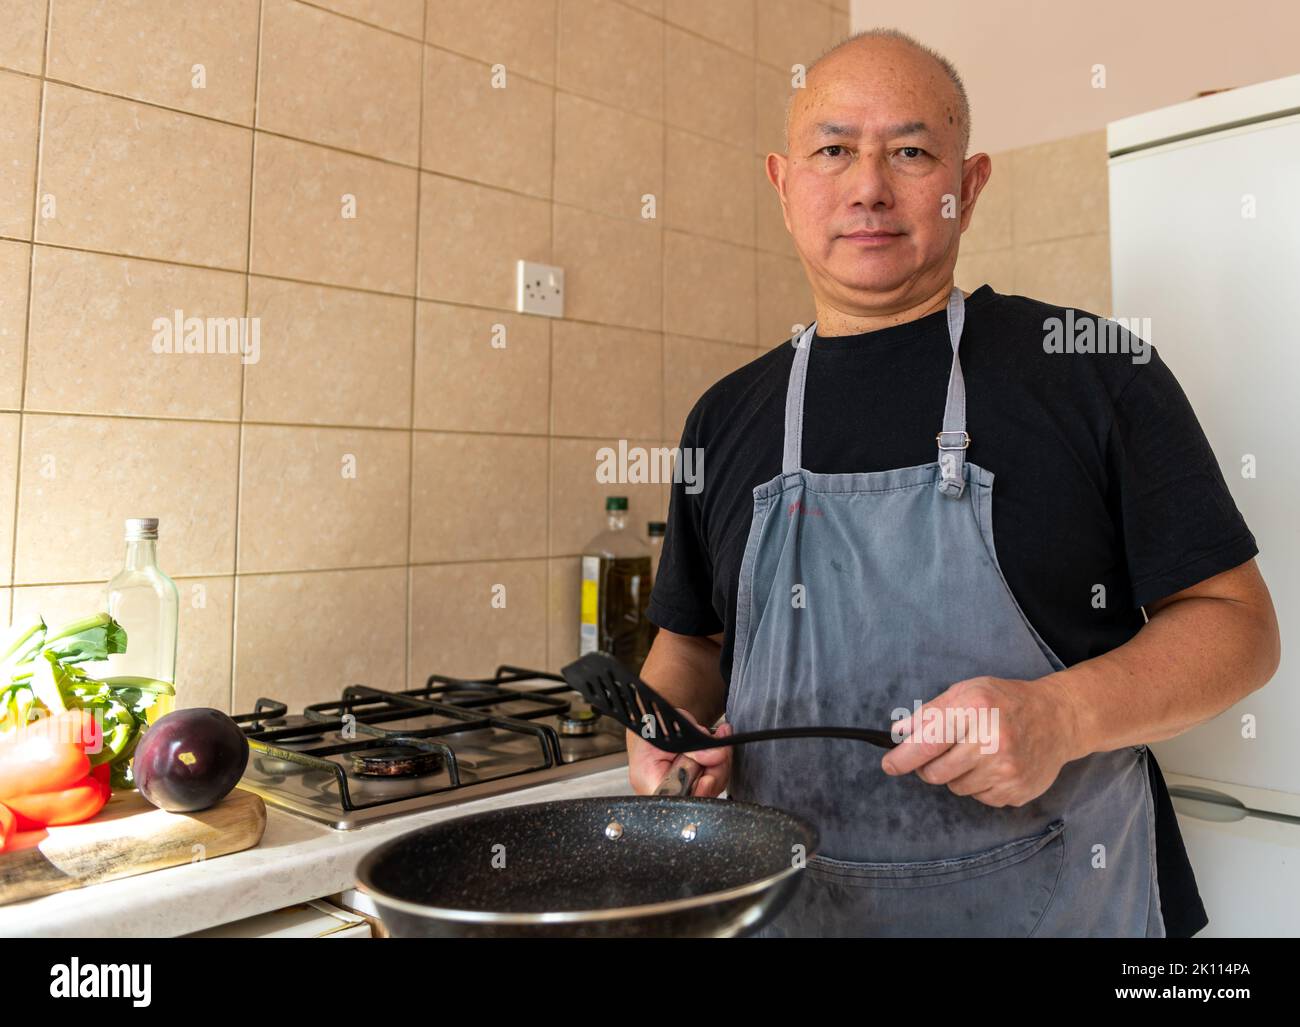 Portrait of a senior man, cook, making a meal in the kitchen. Stock Photo